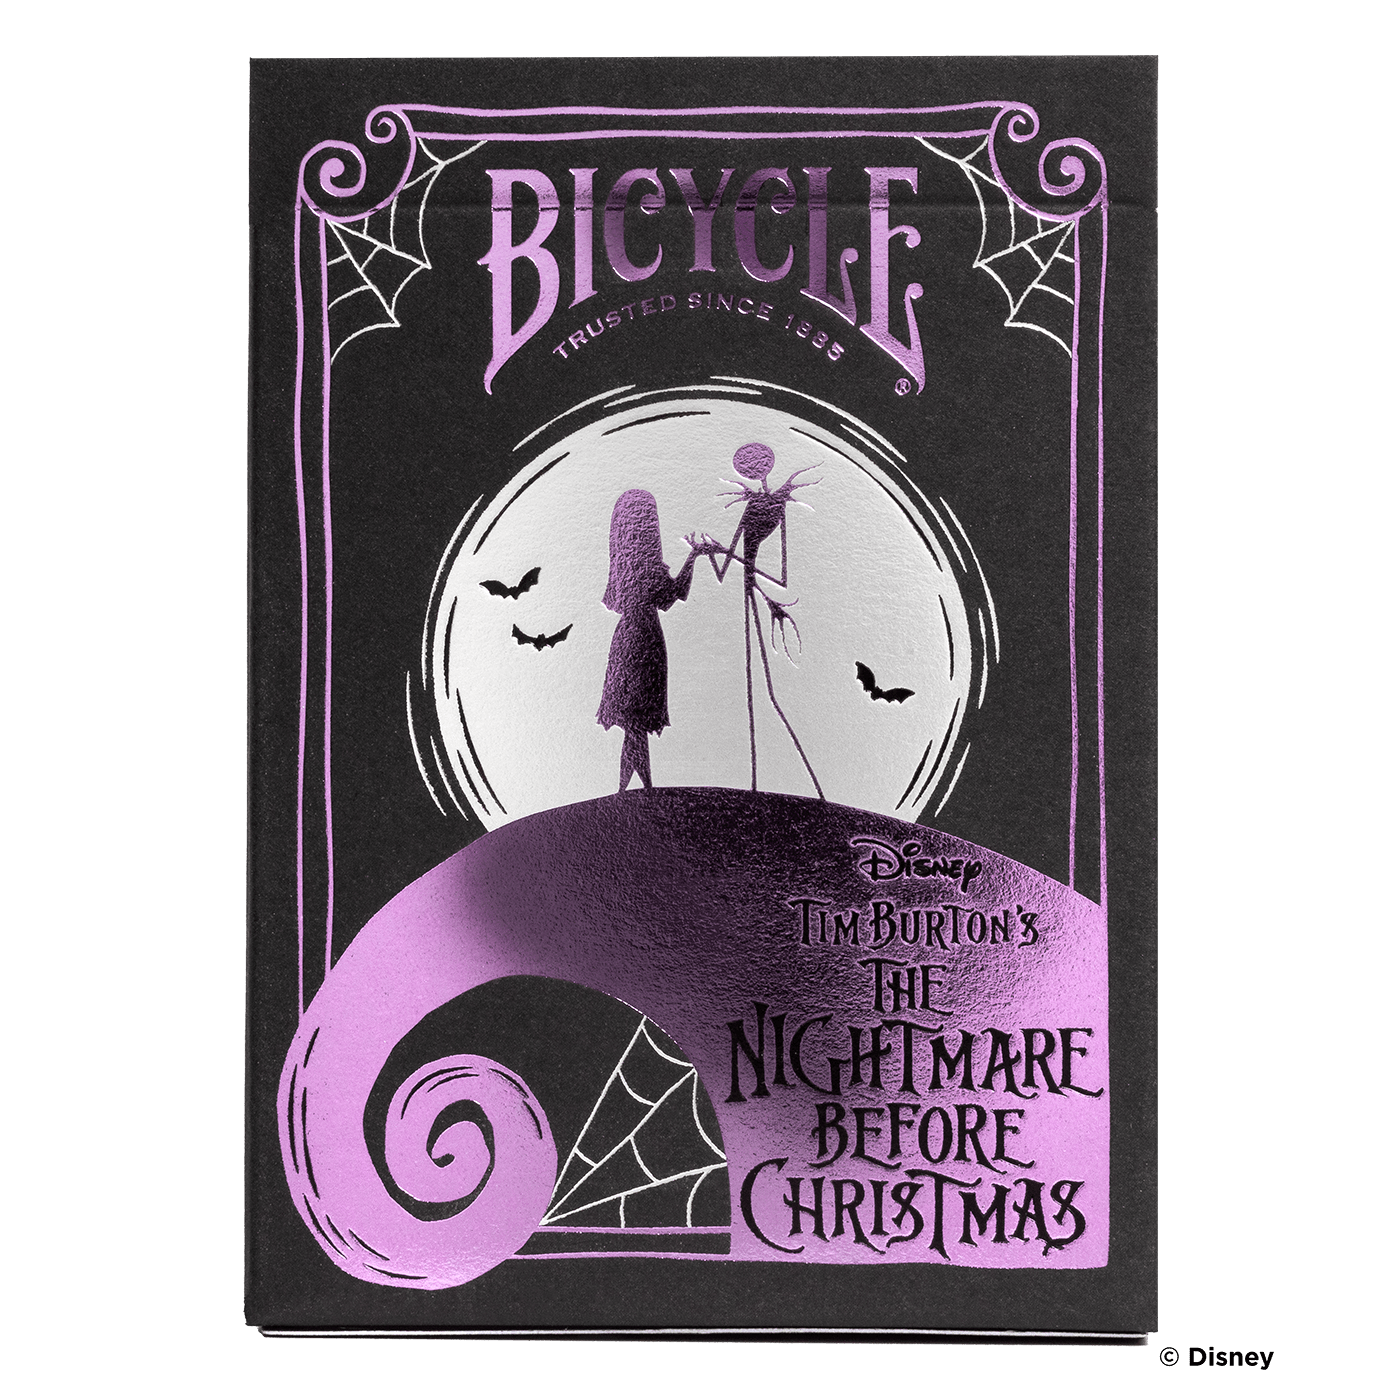 Bicycle Disney Tim Burton's Nightmare Before Christmas-United States Playing Cards Company-Ace Cards & Collectibles